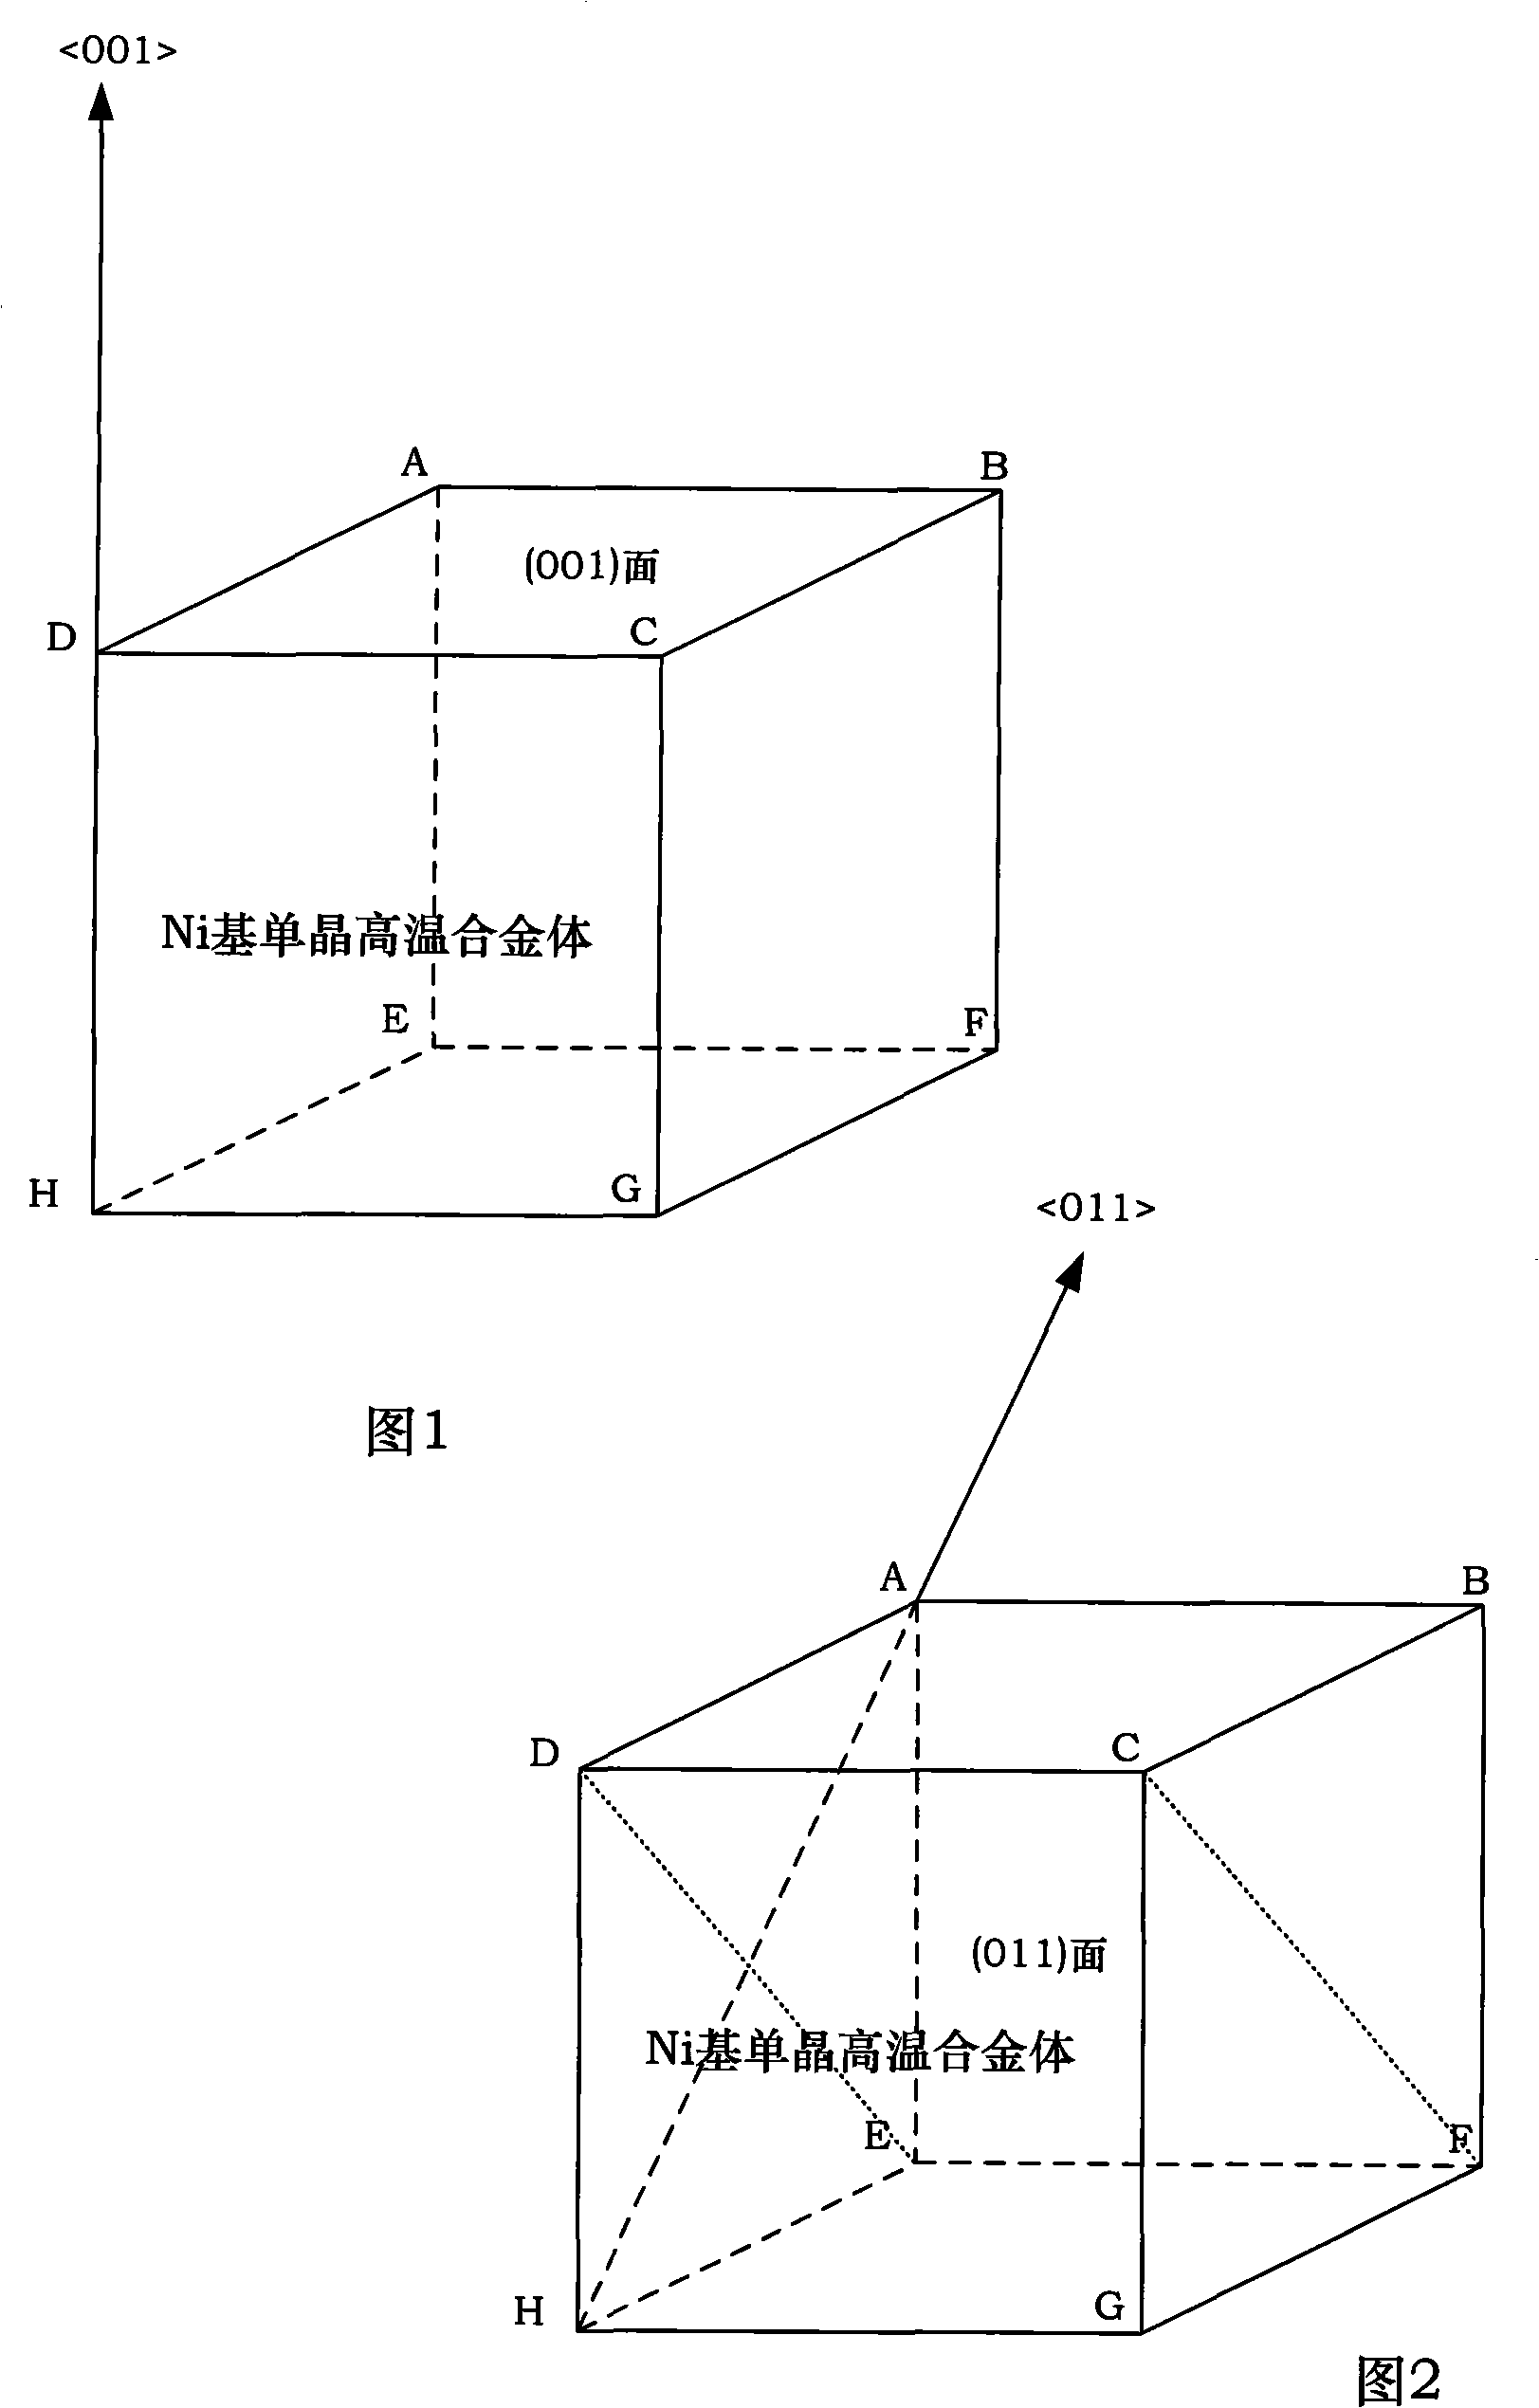 Method for preparing Ni based single-crystal refractory alloy by employing combination of seed crystal method and screw selecting method